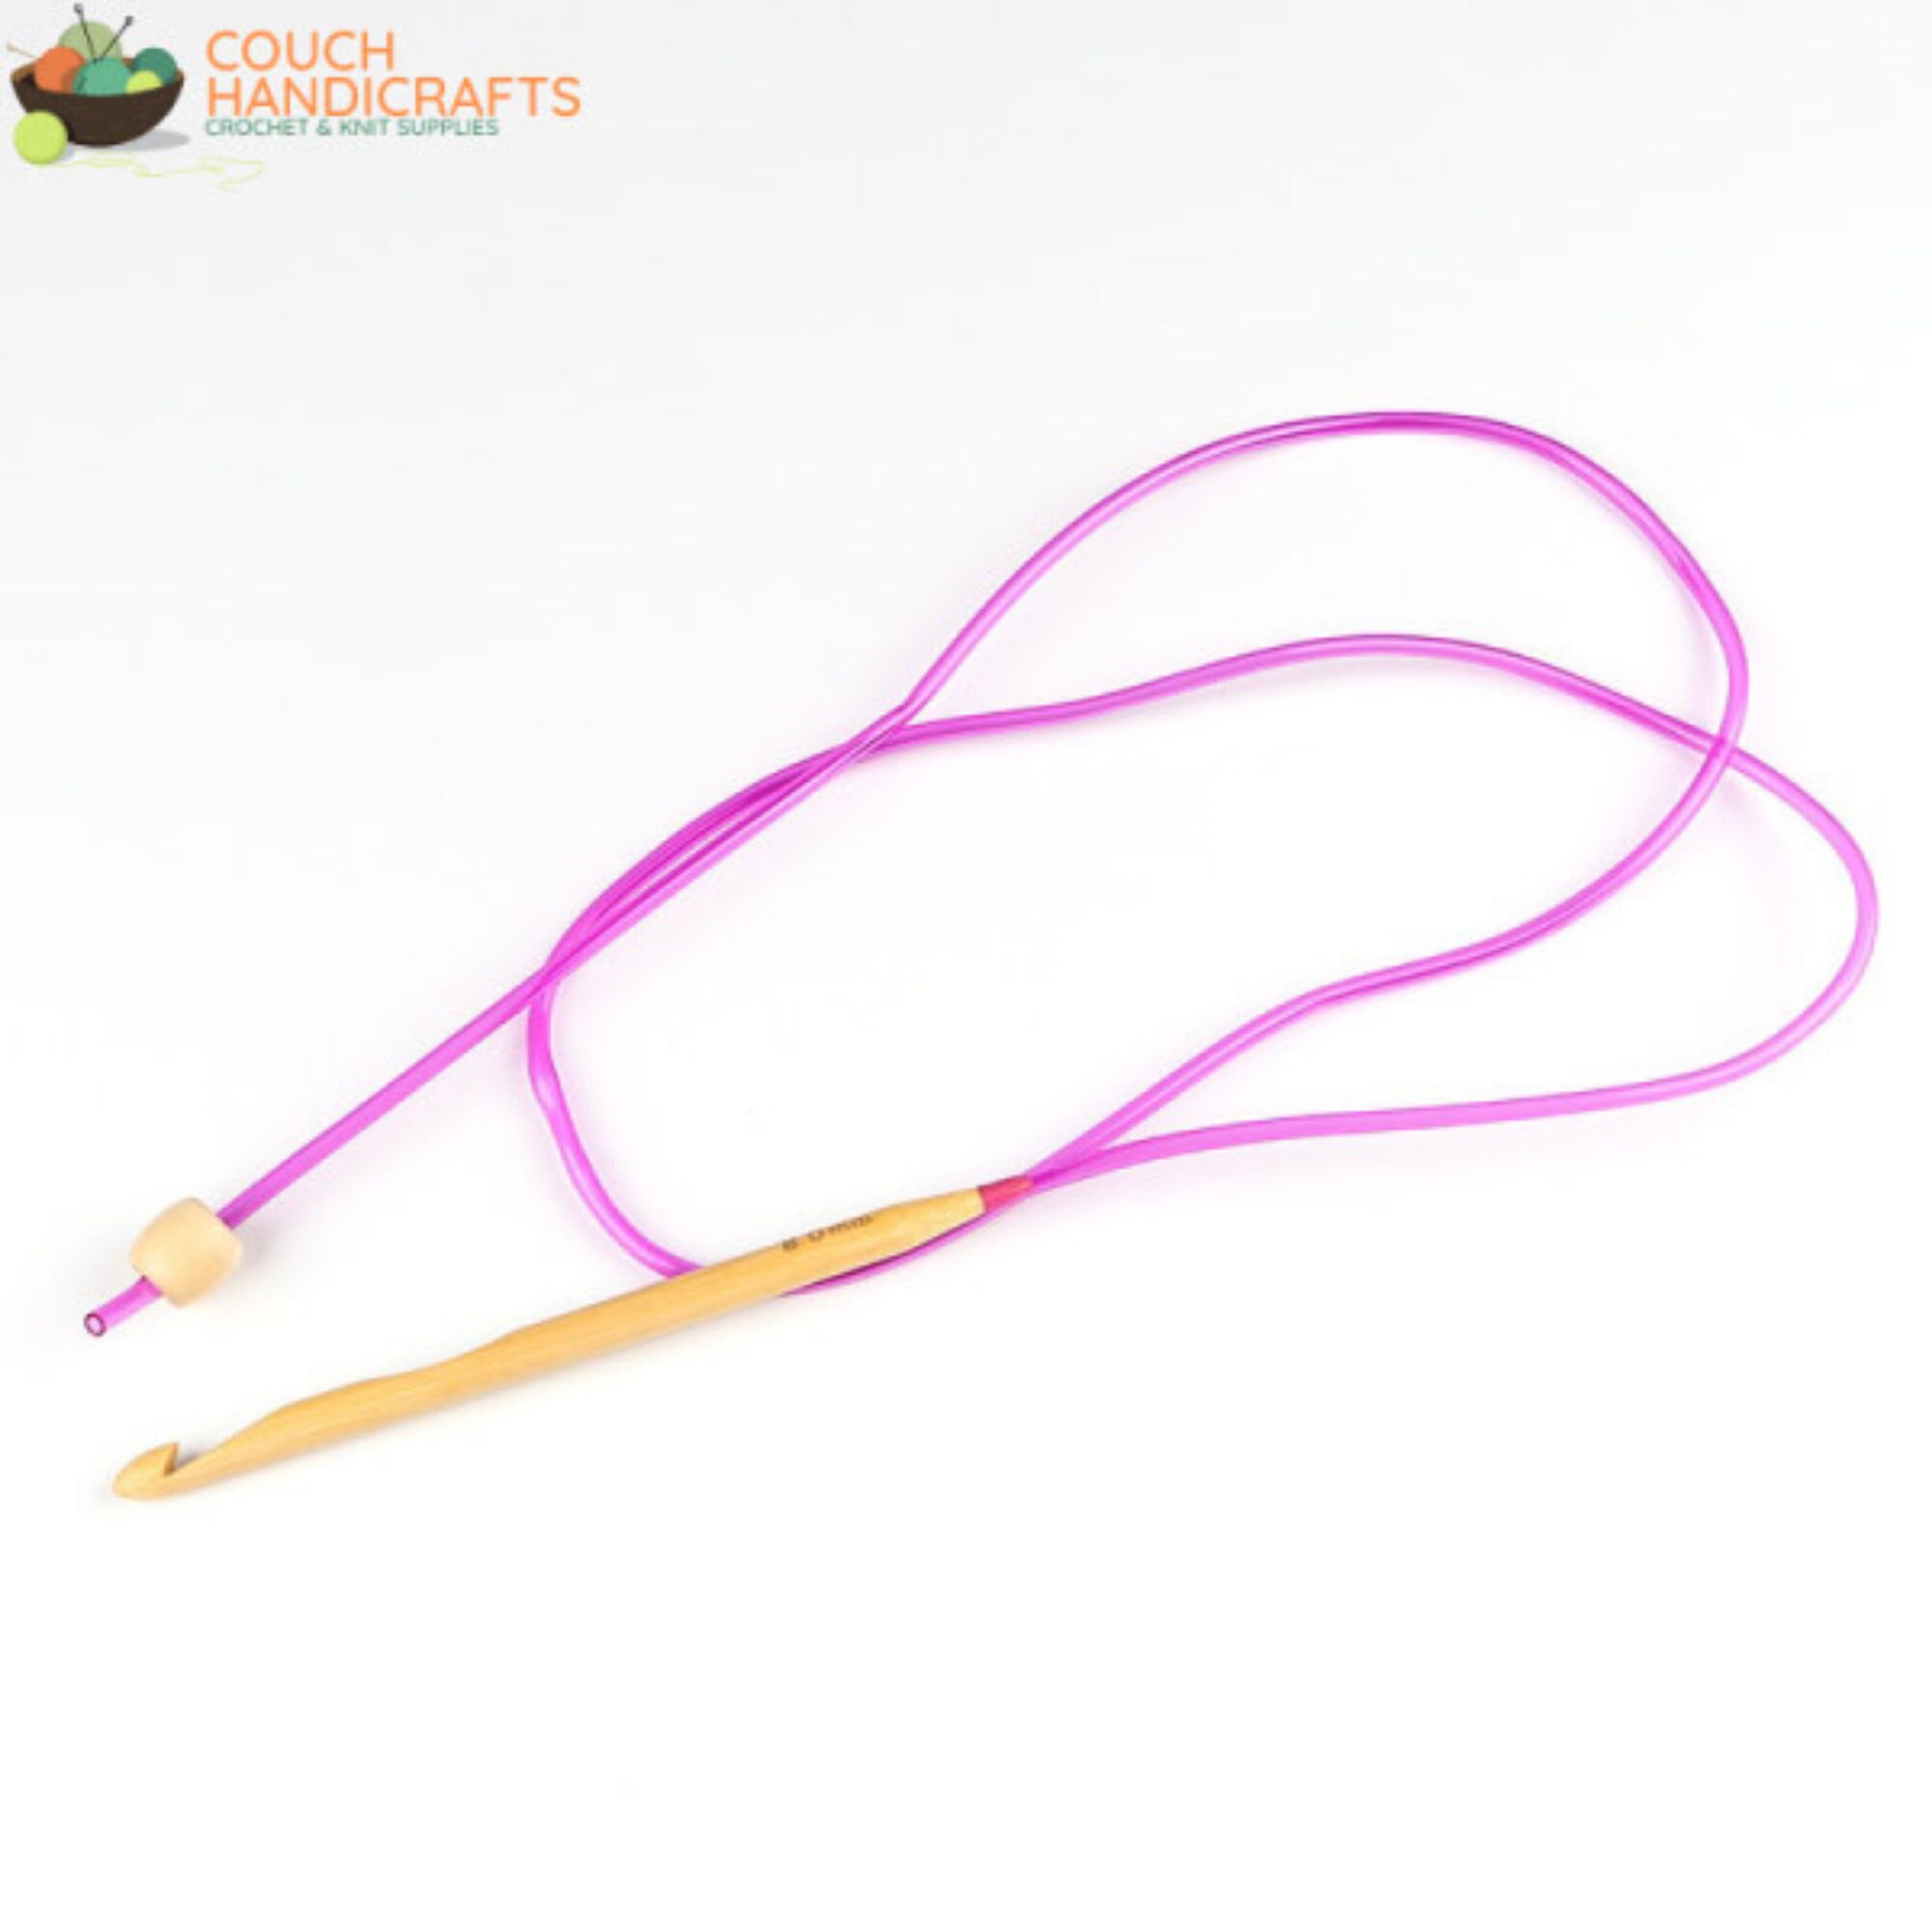 Buy Tunisian Crochet Hooks With Cable Chords, Wooden Hooks, Afghan Crochet,  Crochet Hook, Crochet Supplies, Crochet Accessories, Crochet Scarfs Online  in India 